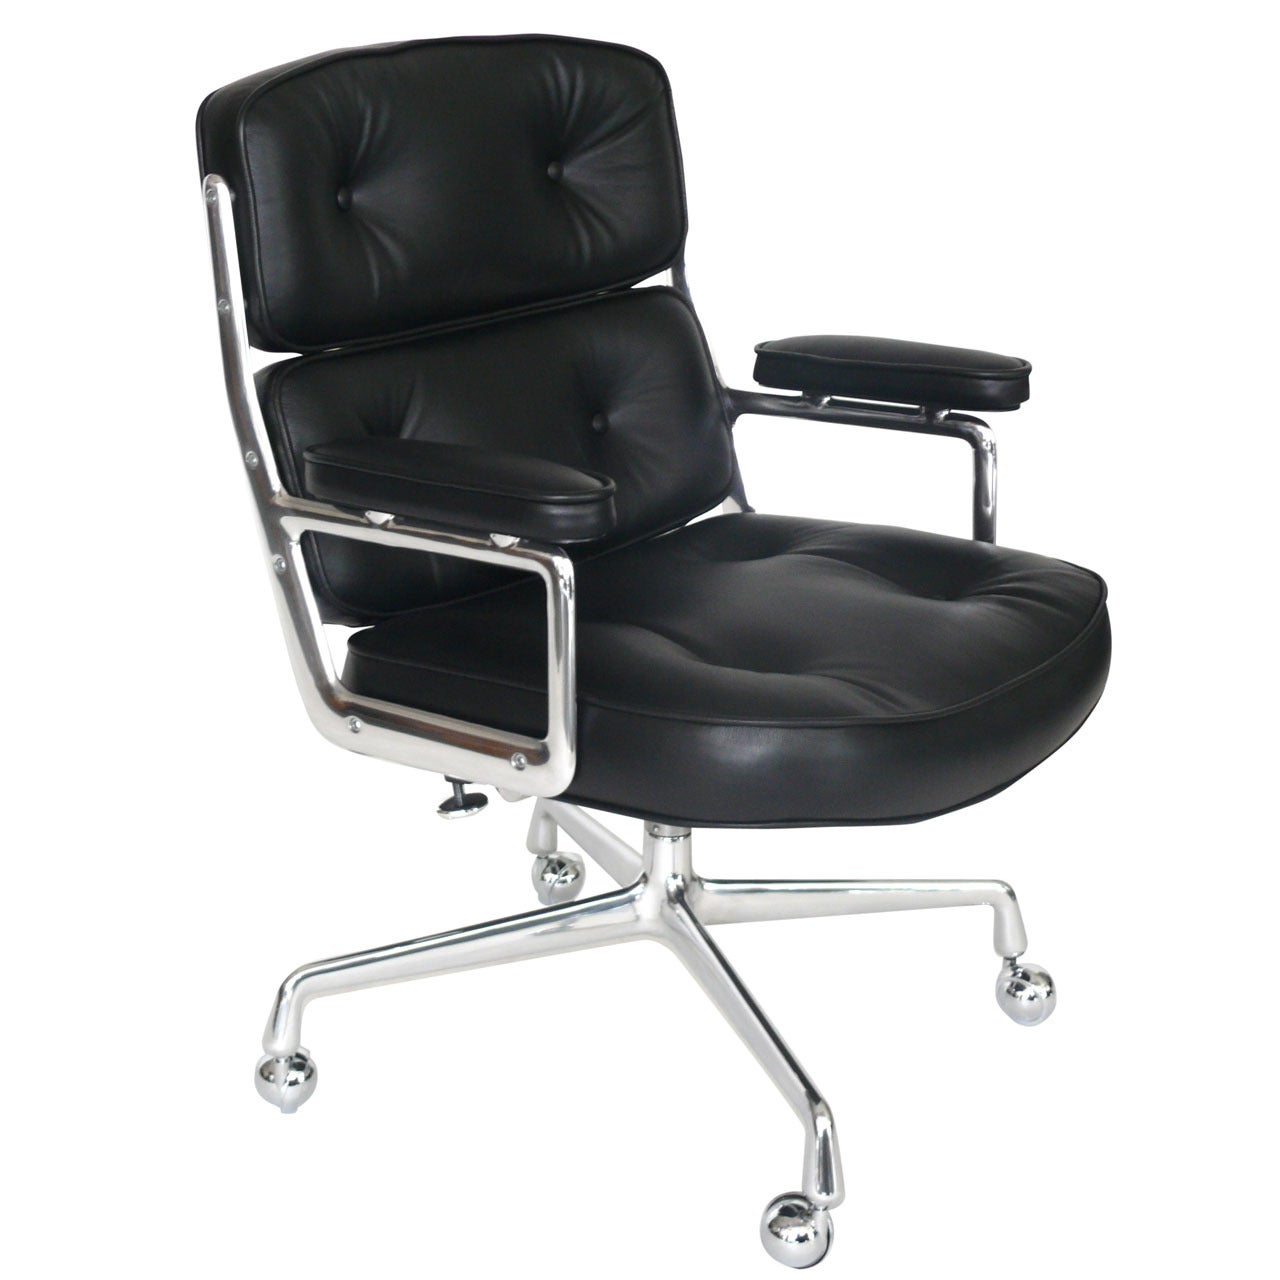 Eames Time Life Chair